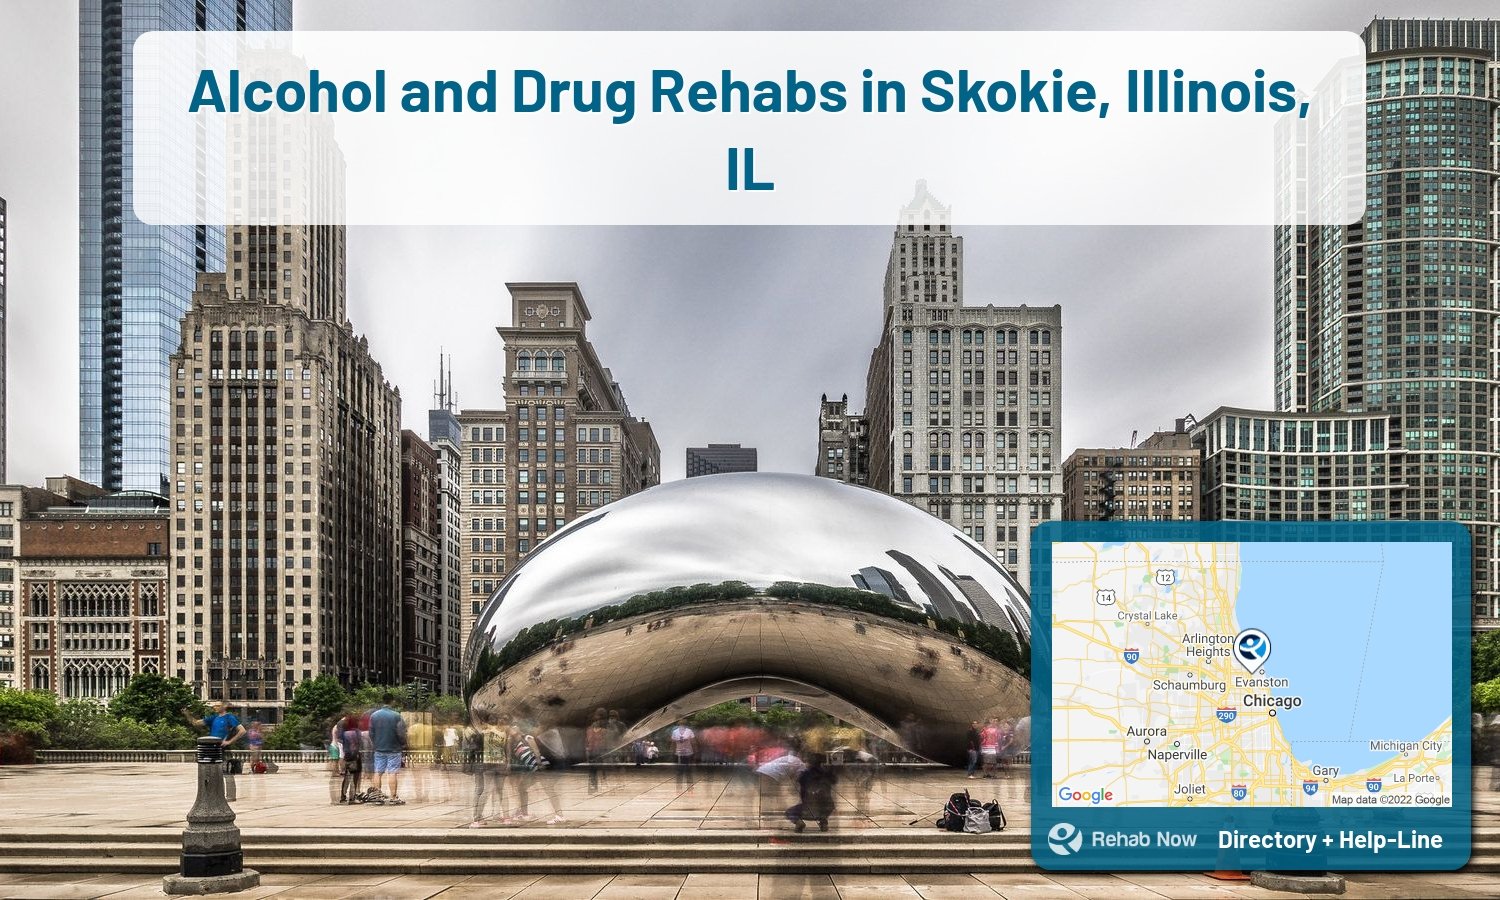 View options, availability, treatment methods, and more, for drug rehab and alcohol treatment in Skokie, Illinois